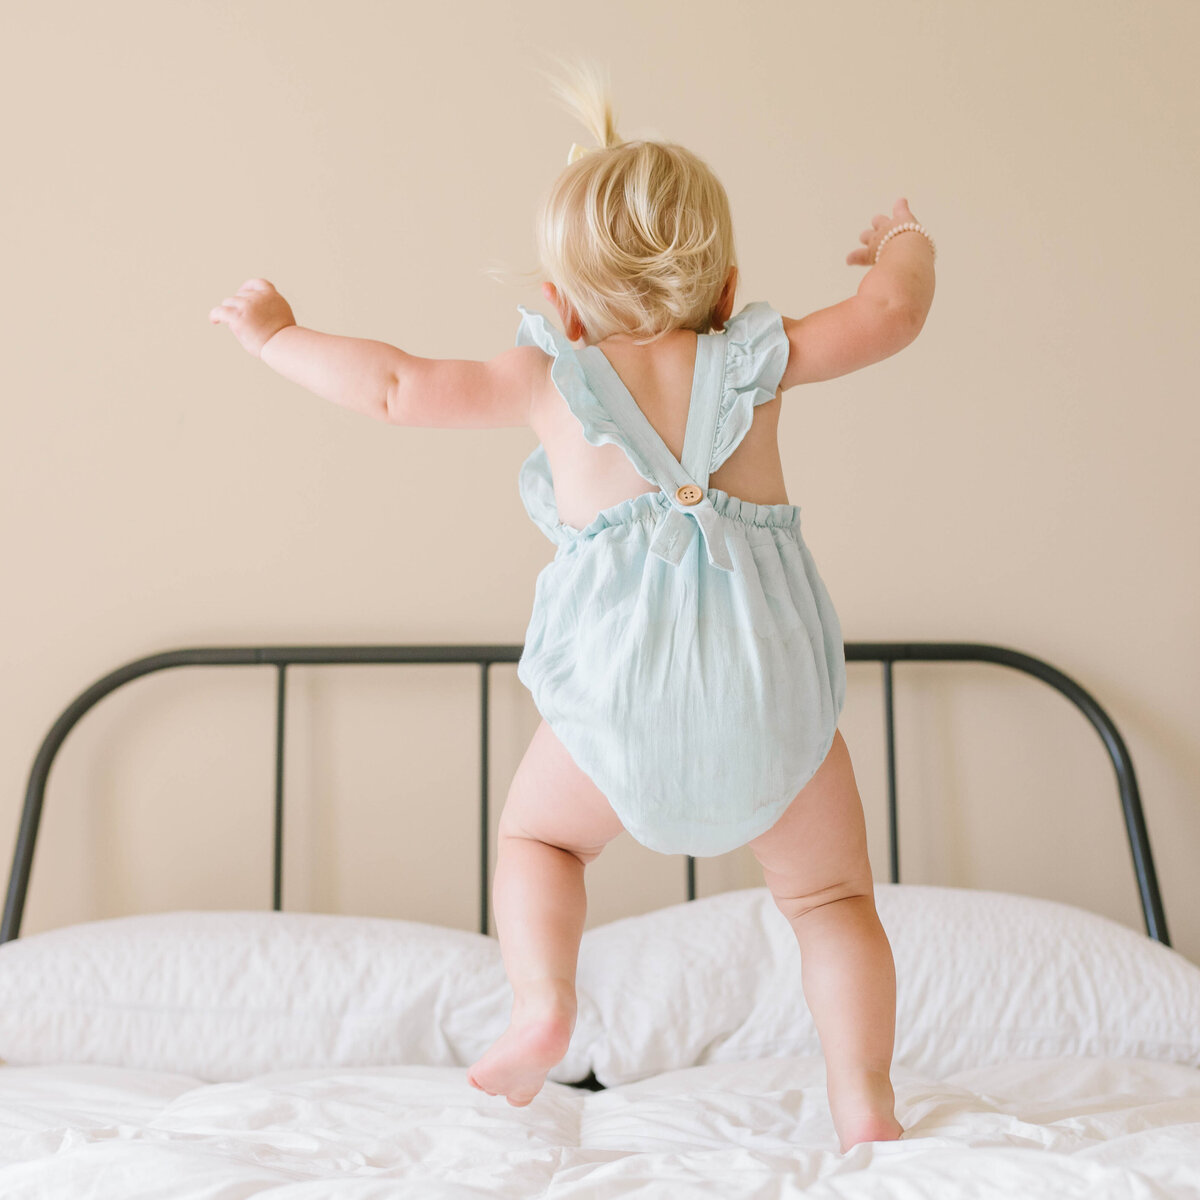 blonde hair toddler jumping on bed